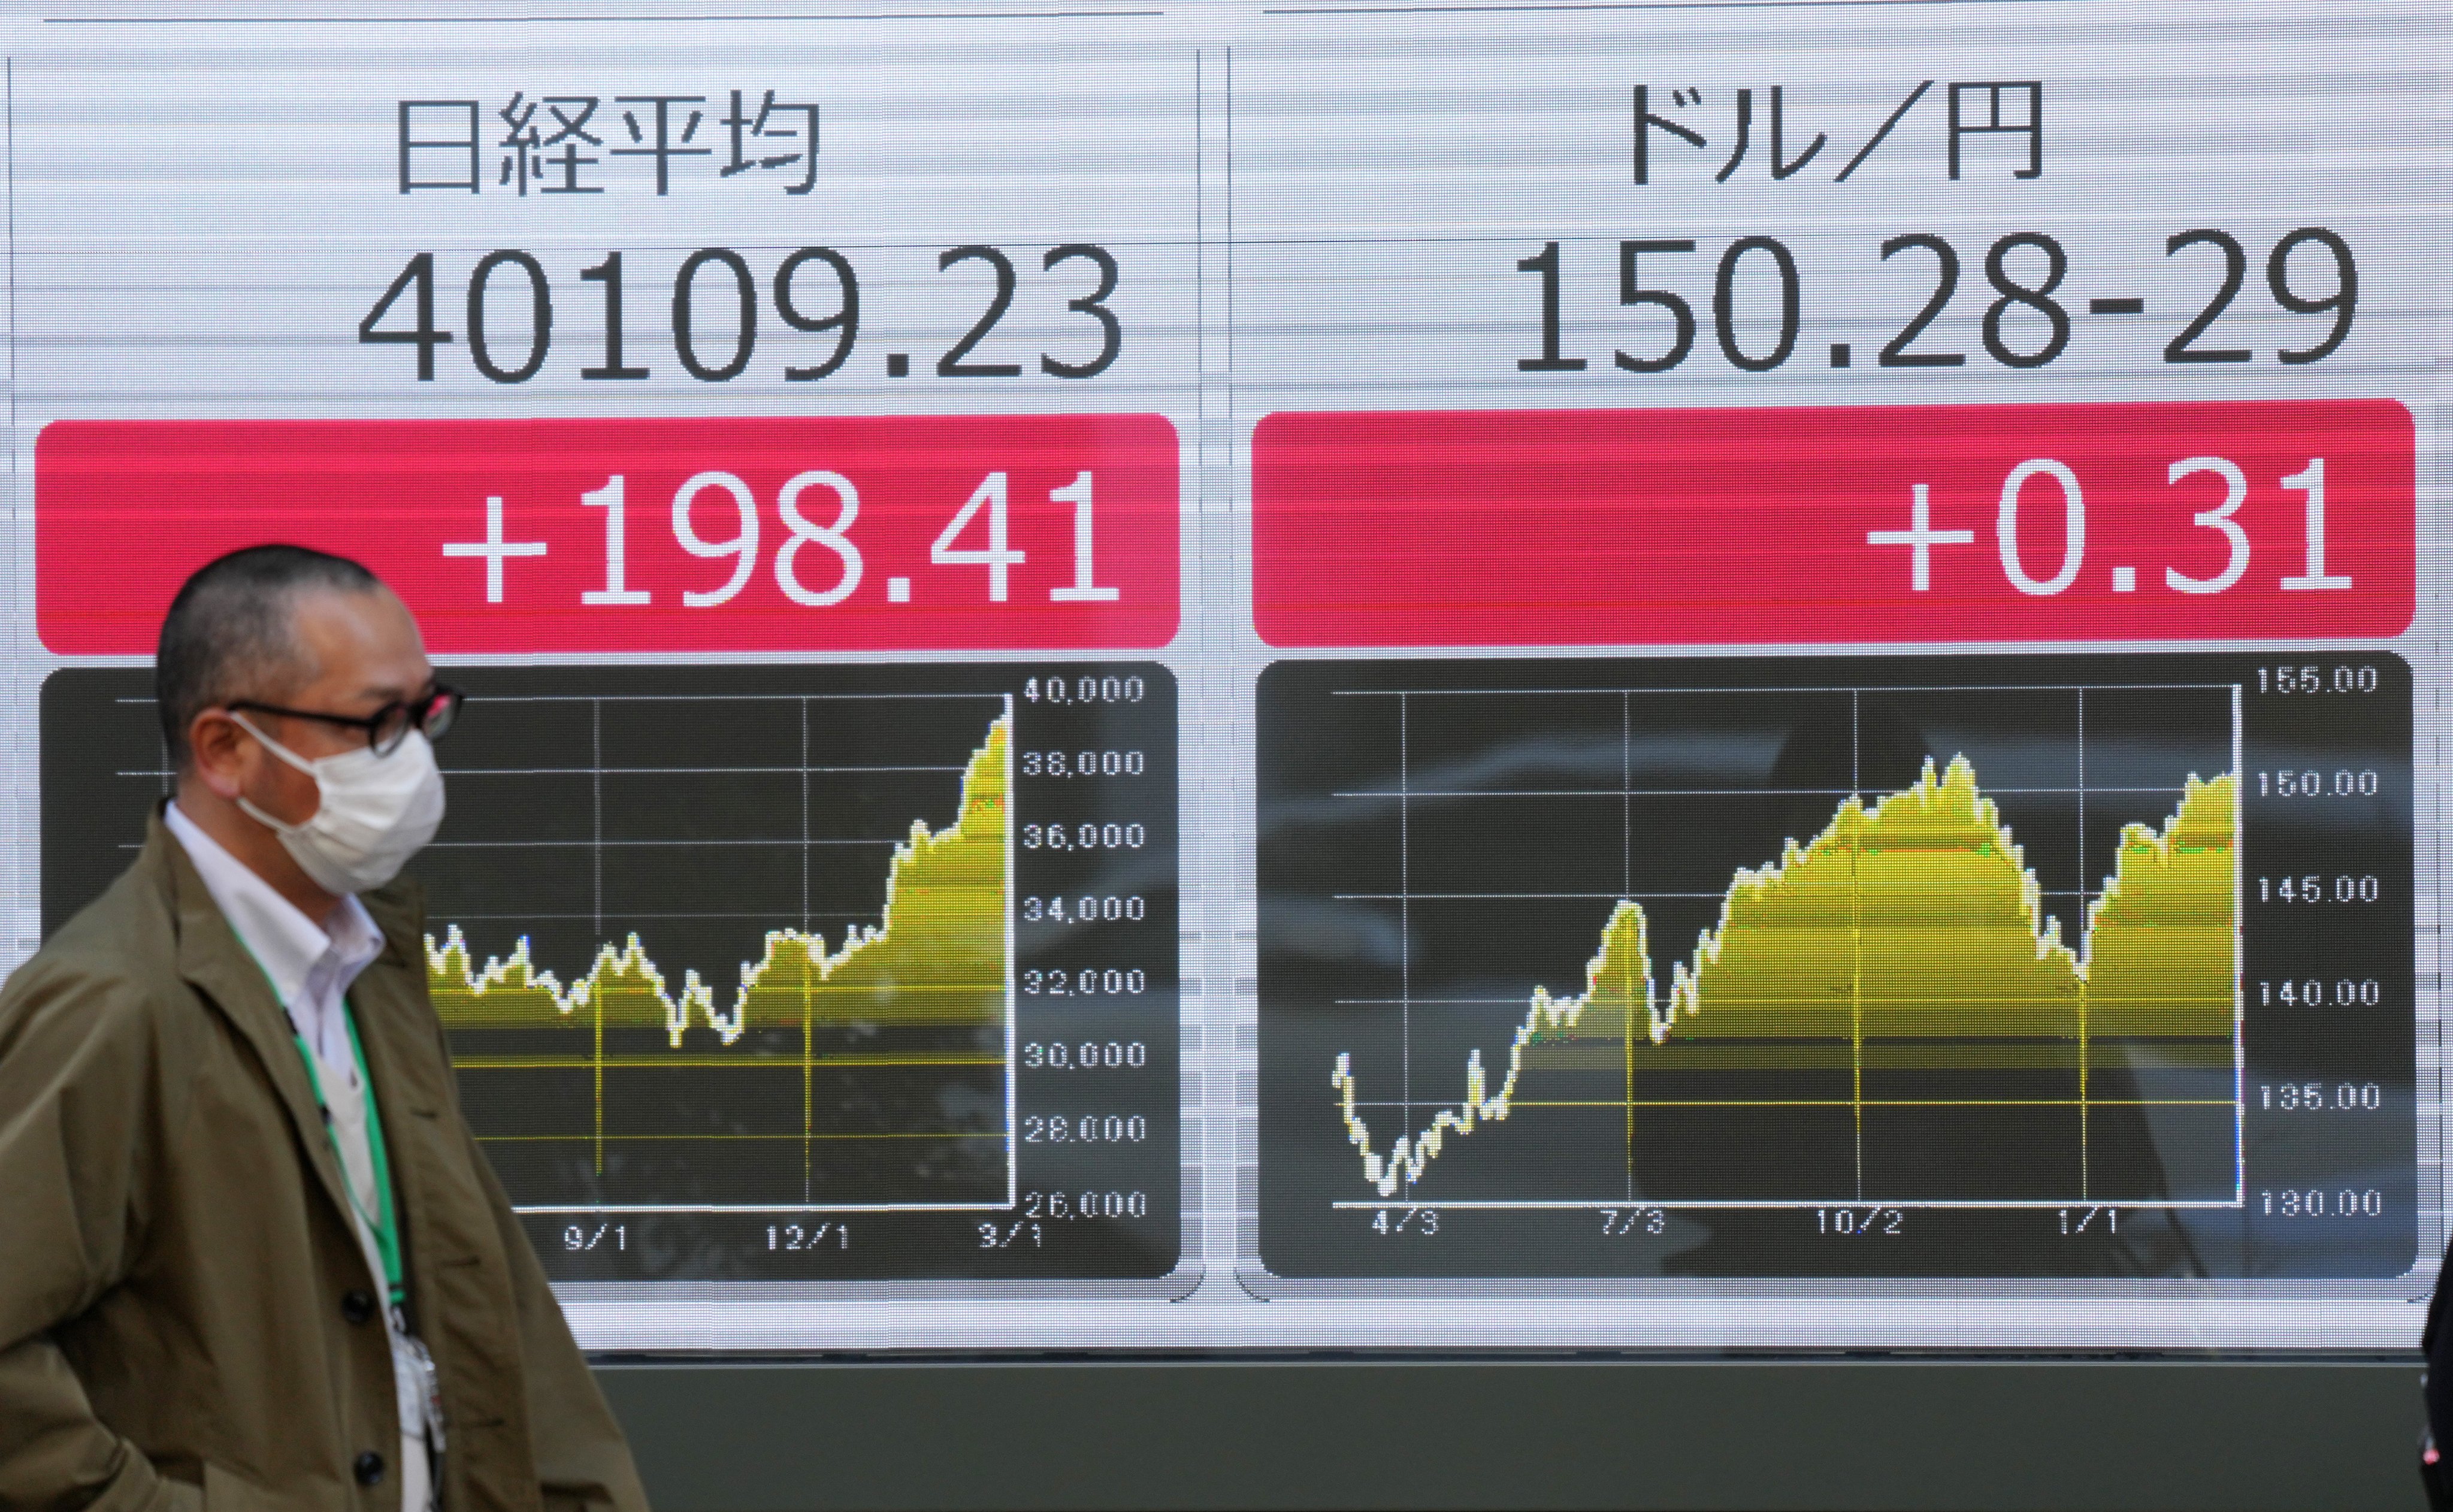 A man walks past a display showing the Nikkei Stock Average breaching the 40,000 level for the first time on March 4. Photo: EPA-EFE